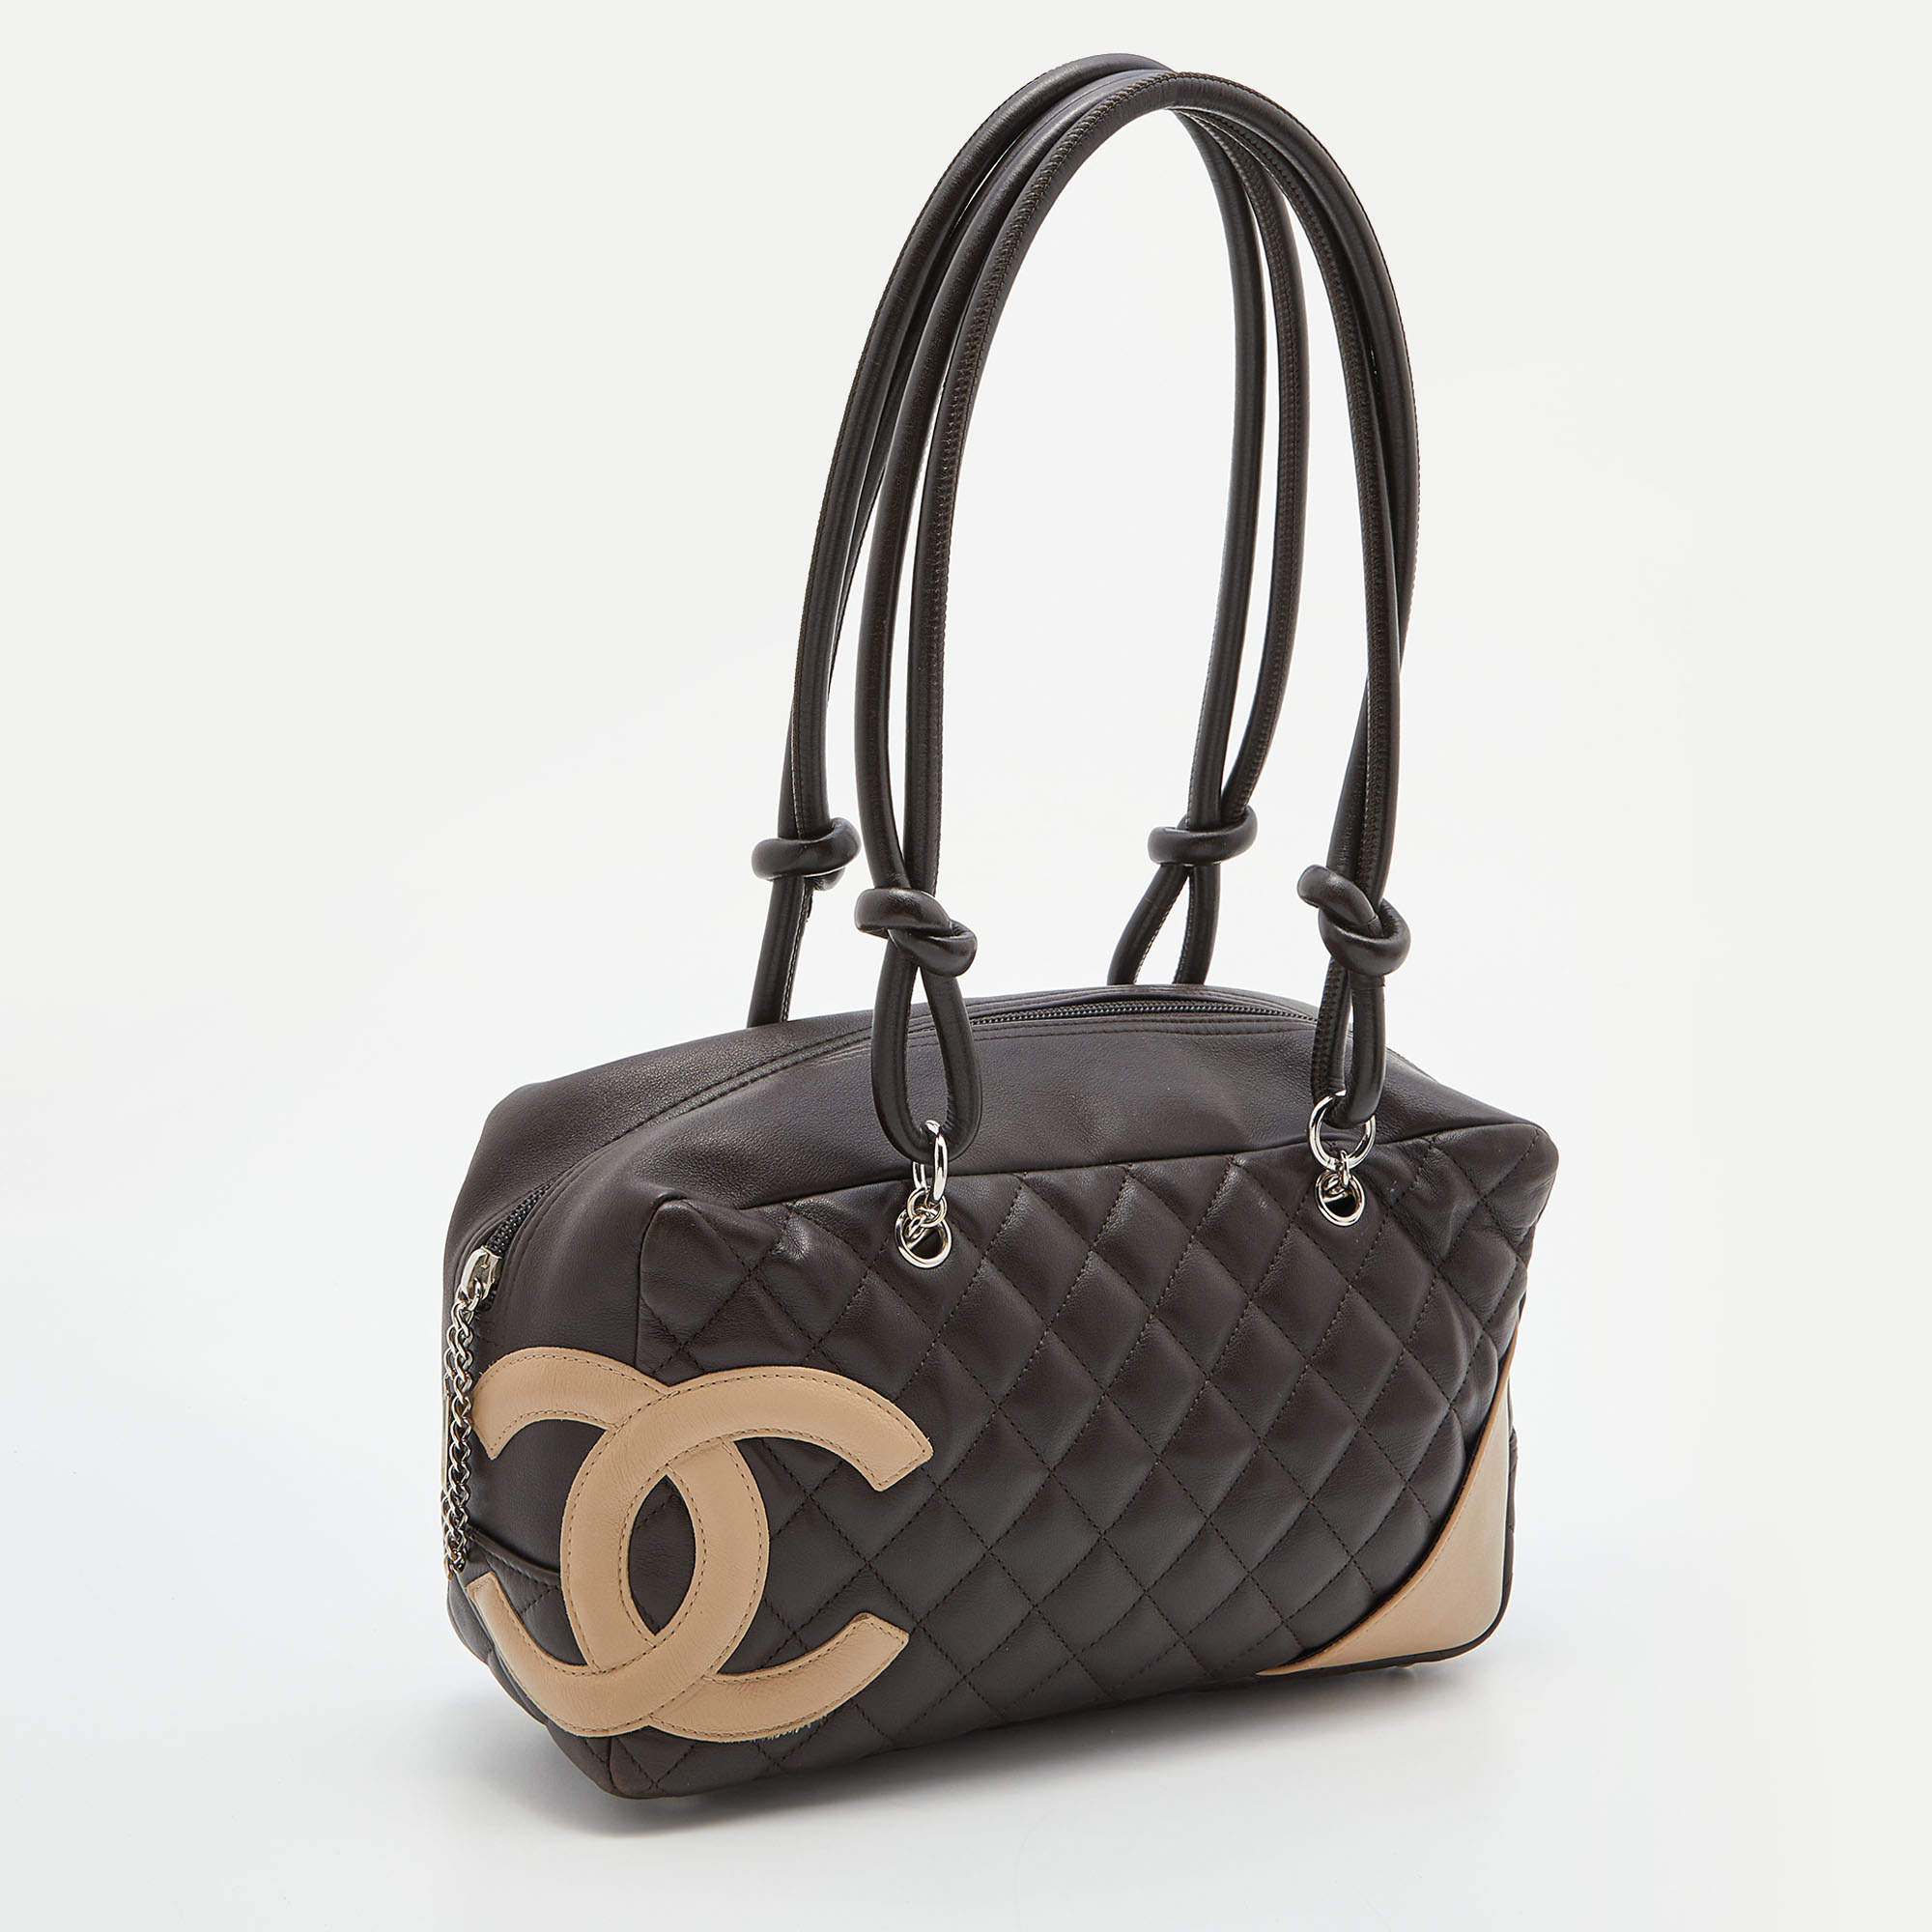 Chanel Brown/Beige Quilted Leather Cambon Ligne Bowler Bag Chanel